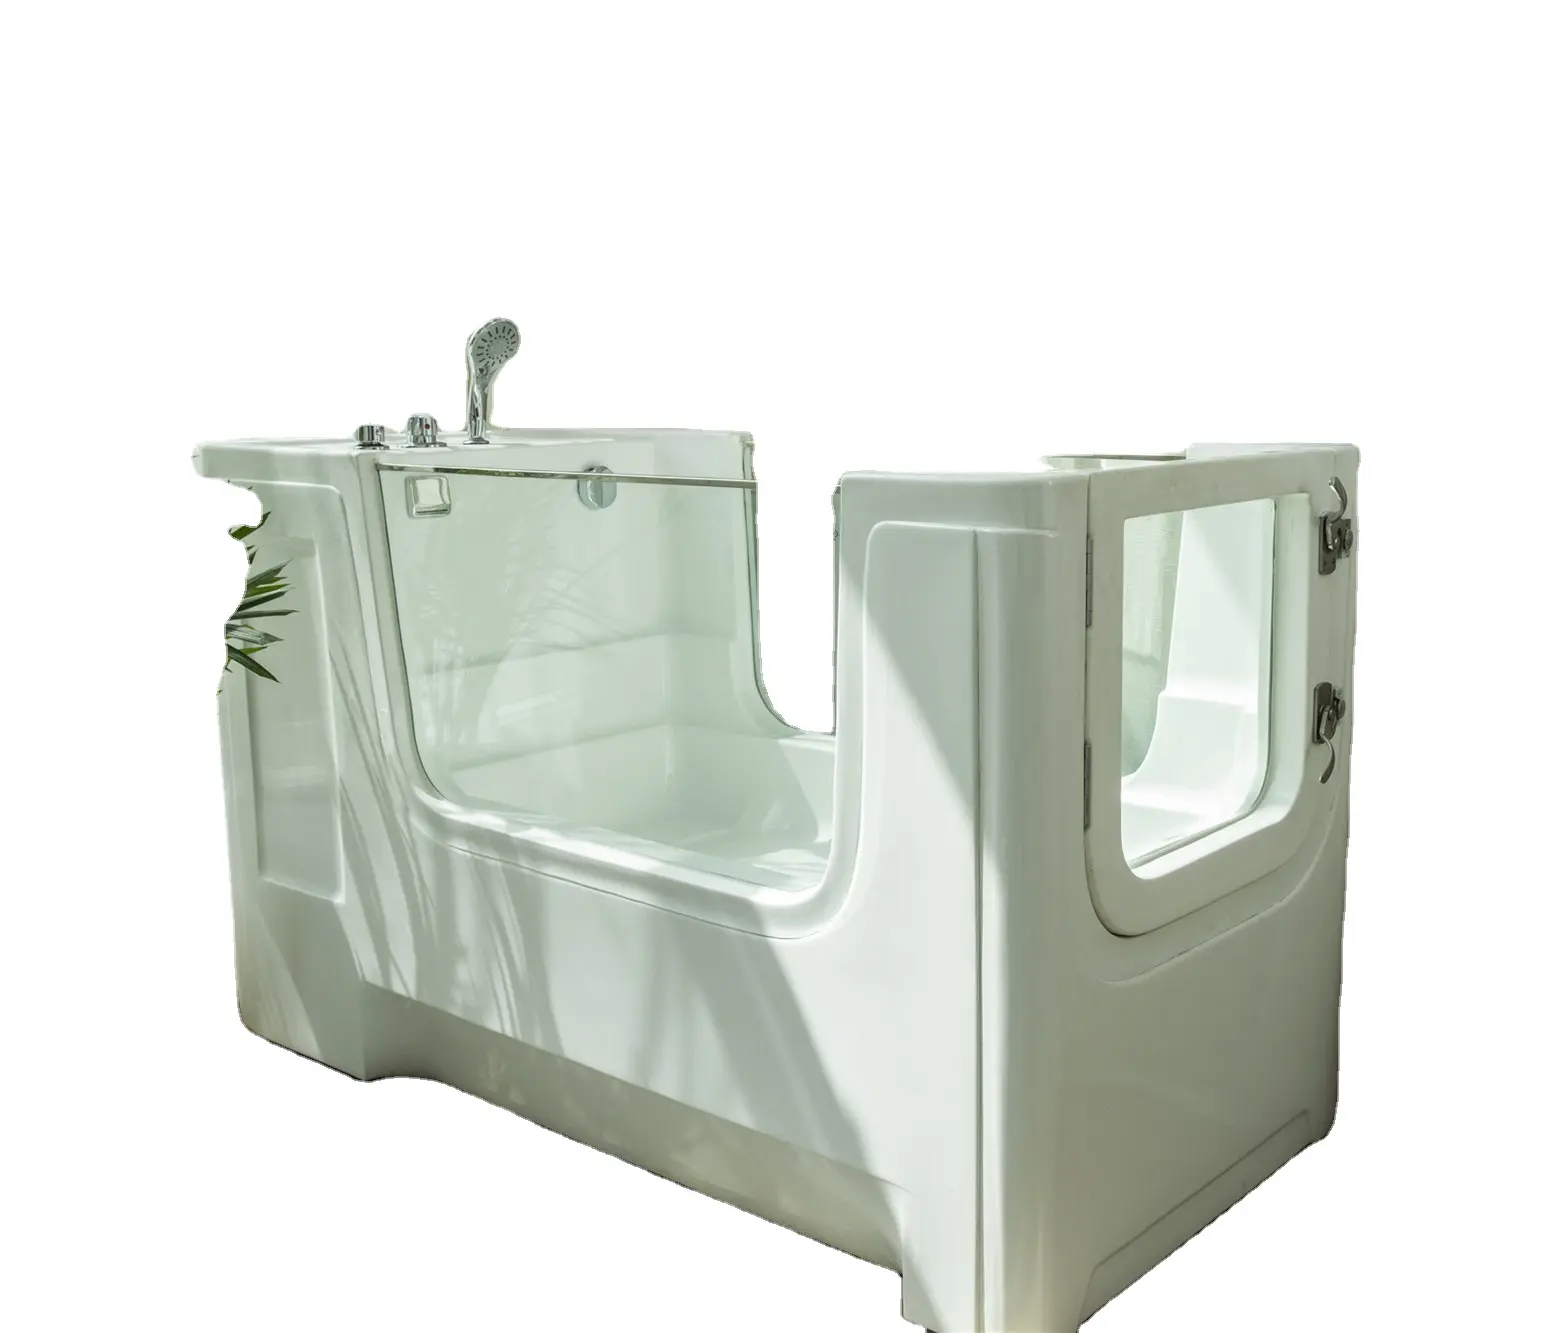 manufacturing dog grooming tubs/dog spa bath/dog wash station/CE,ISO9001 certification,owes walk in bathtub with shower